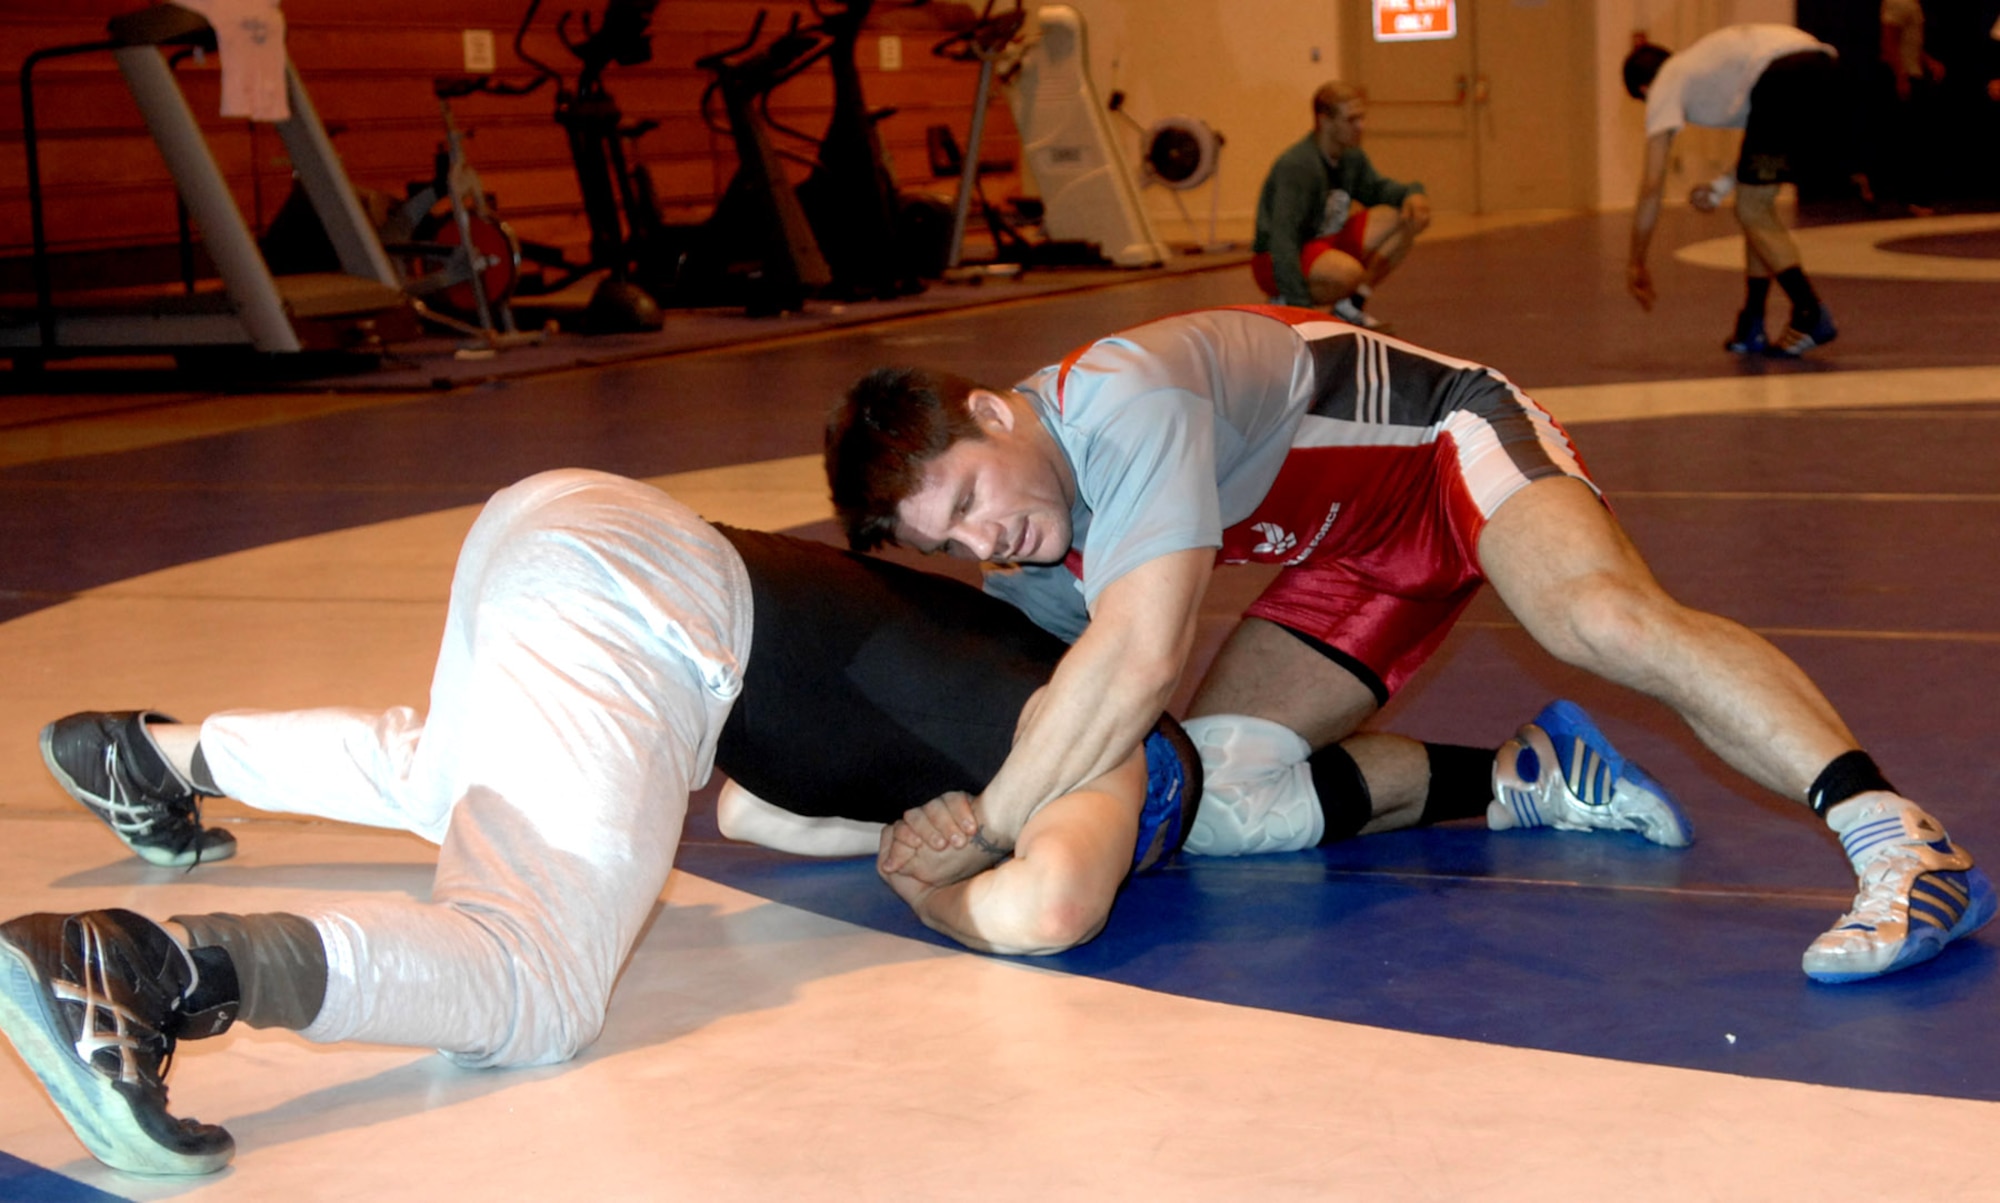 Nader Maghribe (left) and Brett Spangler practice their wrestling moves in preparation for the Armed Forces Championship March 5 at the fitness center on Mountain Home Air Force Base, Idaho. Beginning Feb. 13, almost two dozen potential candidates for the All Air Force Wrestling Team began tryouts for the 2008 wrestling season. After more than 120 candidates sent applications to Richard Estrella, the Air Force wrestling coach for 21 years, he chose the 13 most-talented athletes to join the team. Maghribe is stationed at Travis AFB, Calif., and Spangler is from Schriever AFB, Colo., (U.S. Air Force photo/Airman 1st Class Stephany Miller) 
